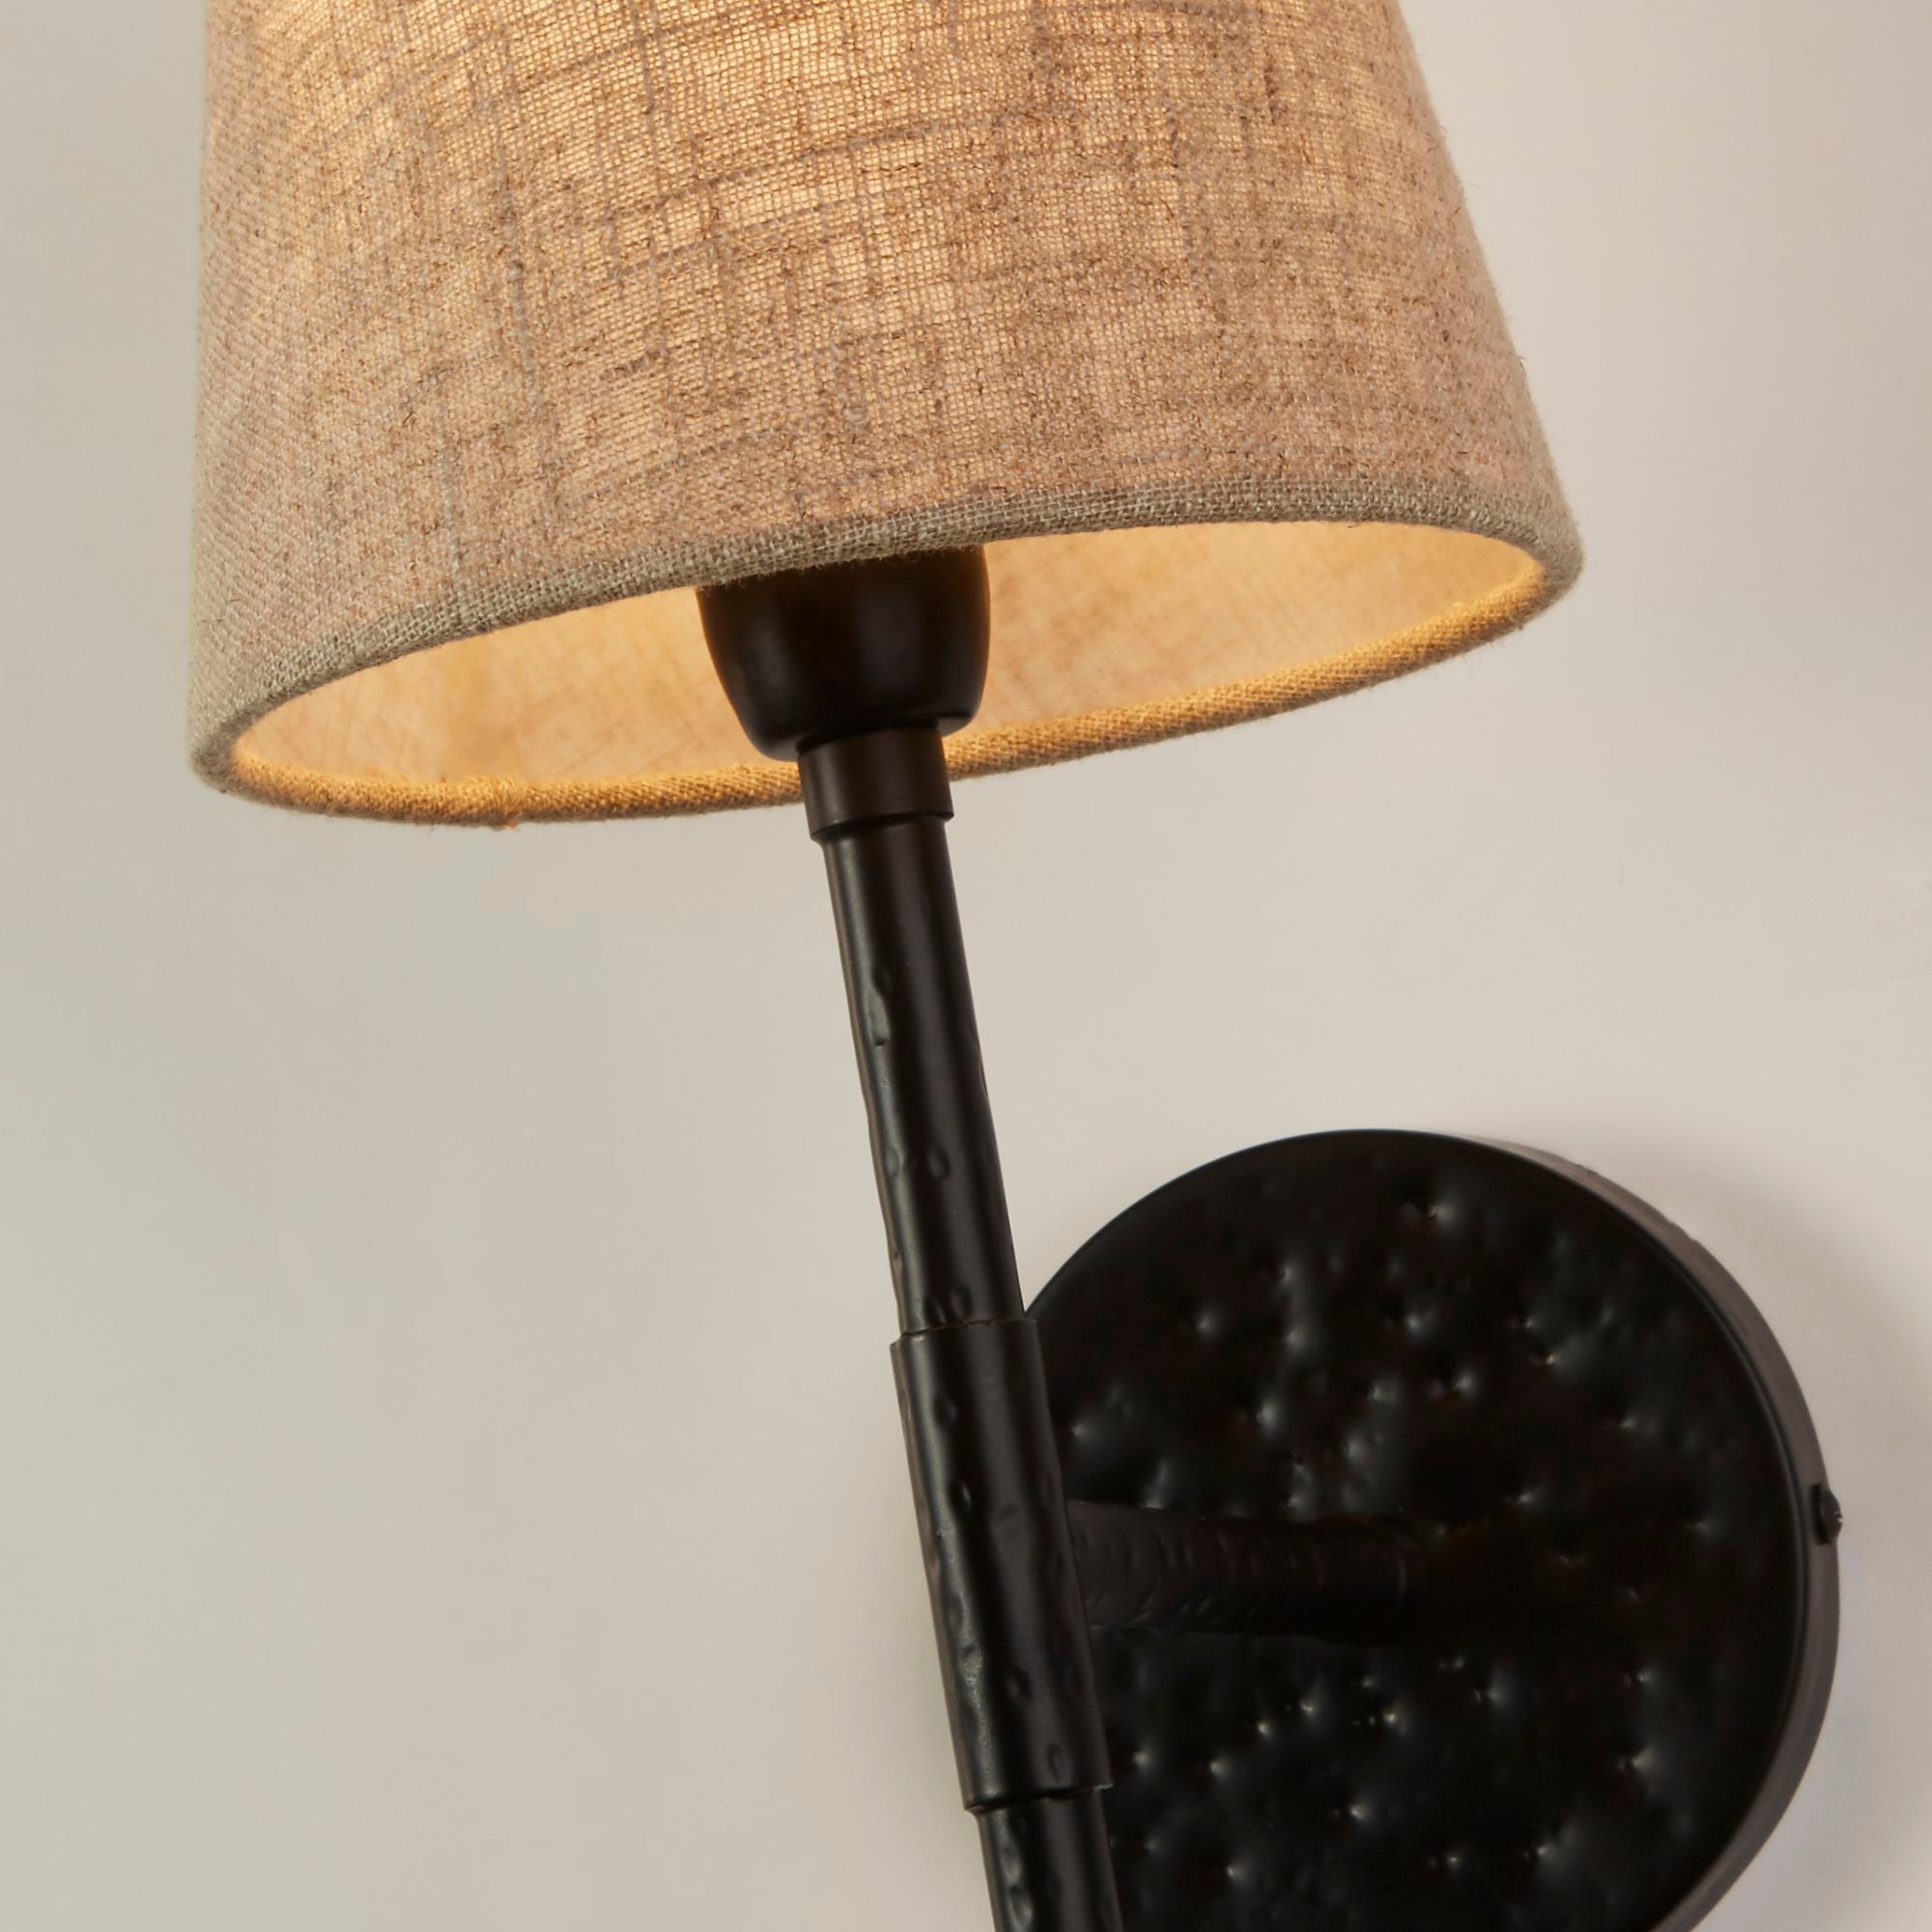 Gothic Wall Light - Hammered Black Metal & Natural Linen